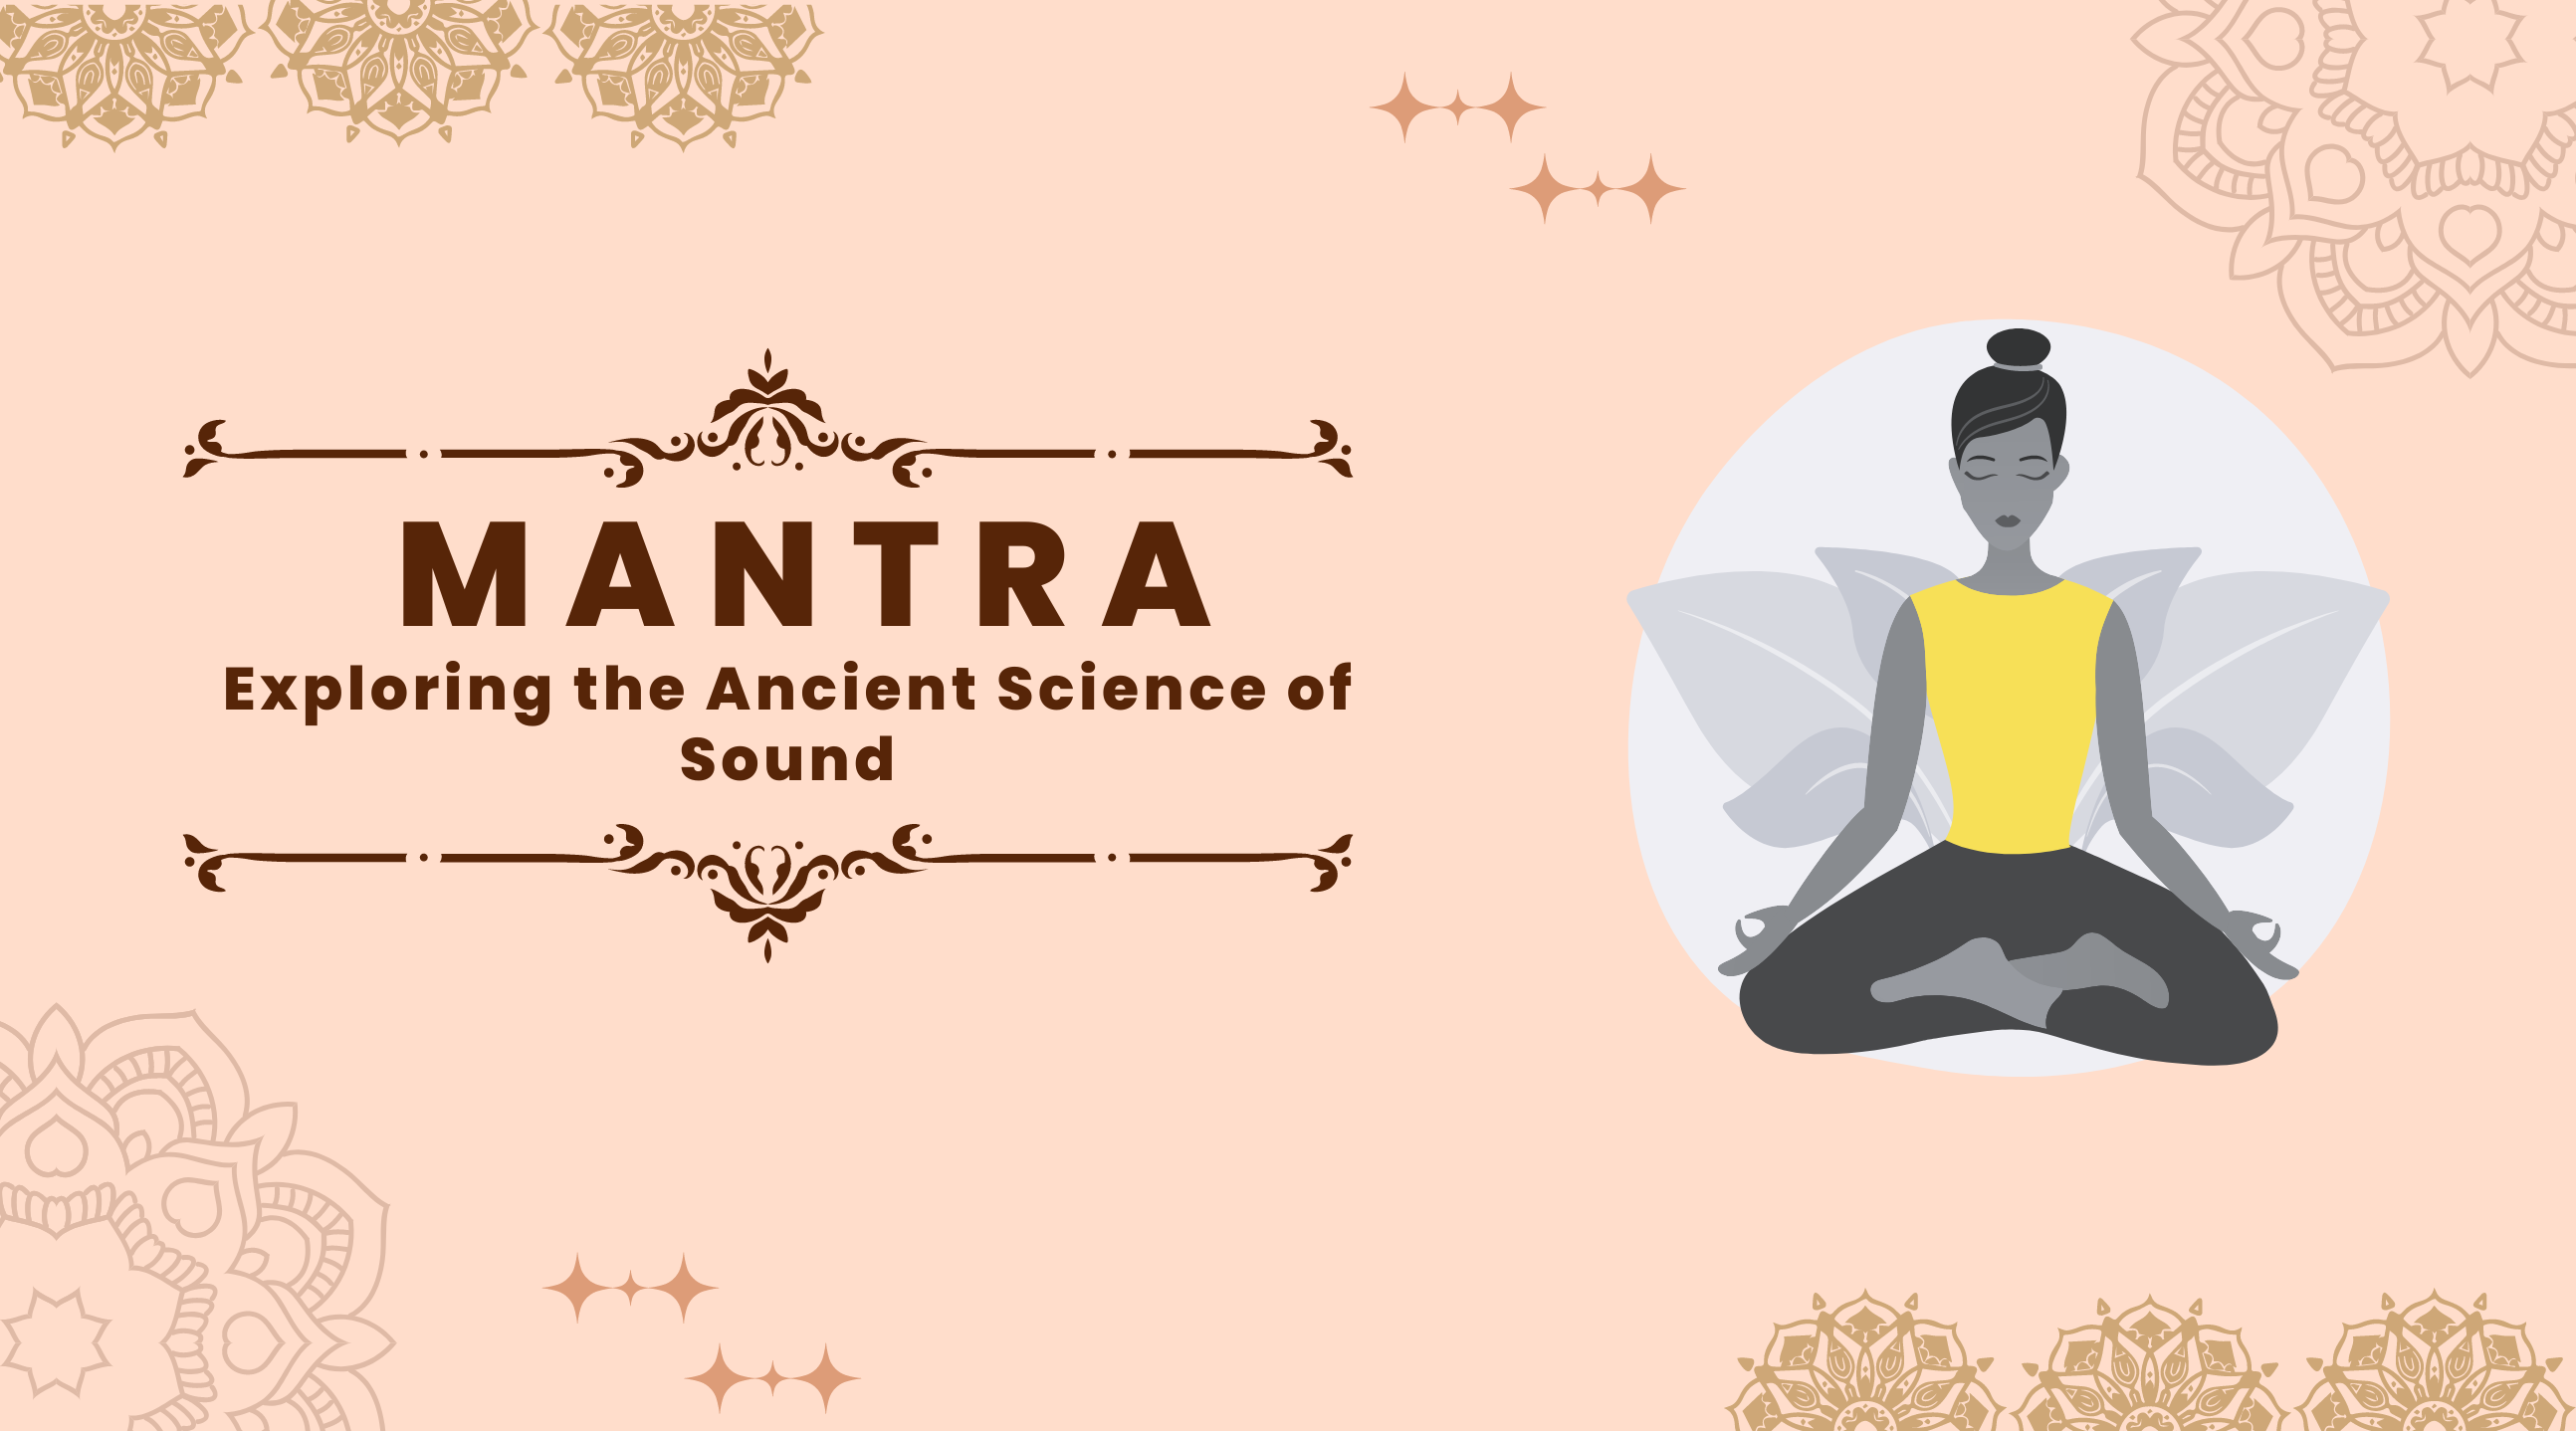 Mantra: Exploring the Ancient Science of Sound